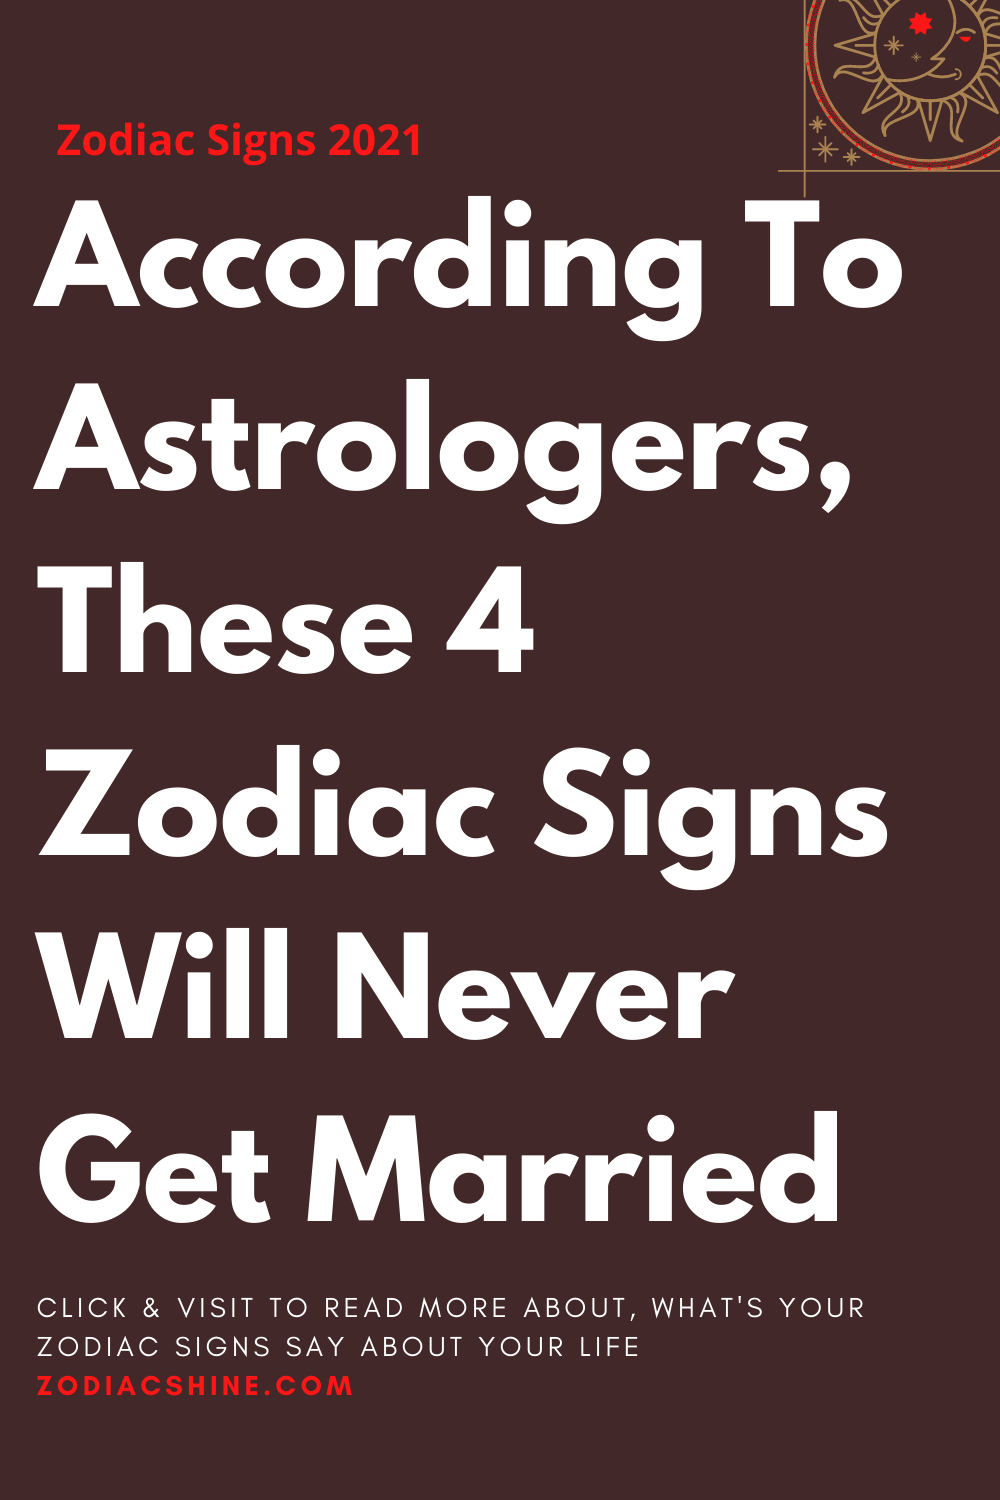 According To Astrologers These 4 Zodiac Signs Will Never Get Married